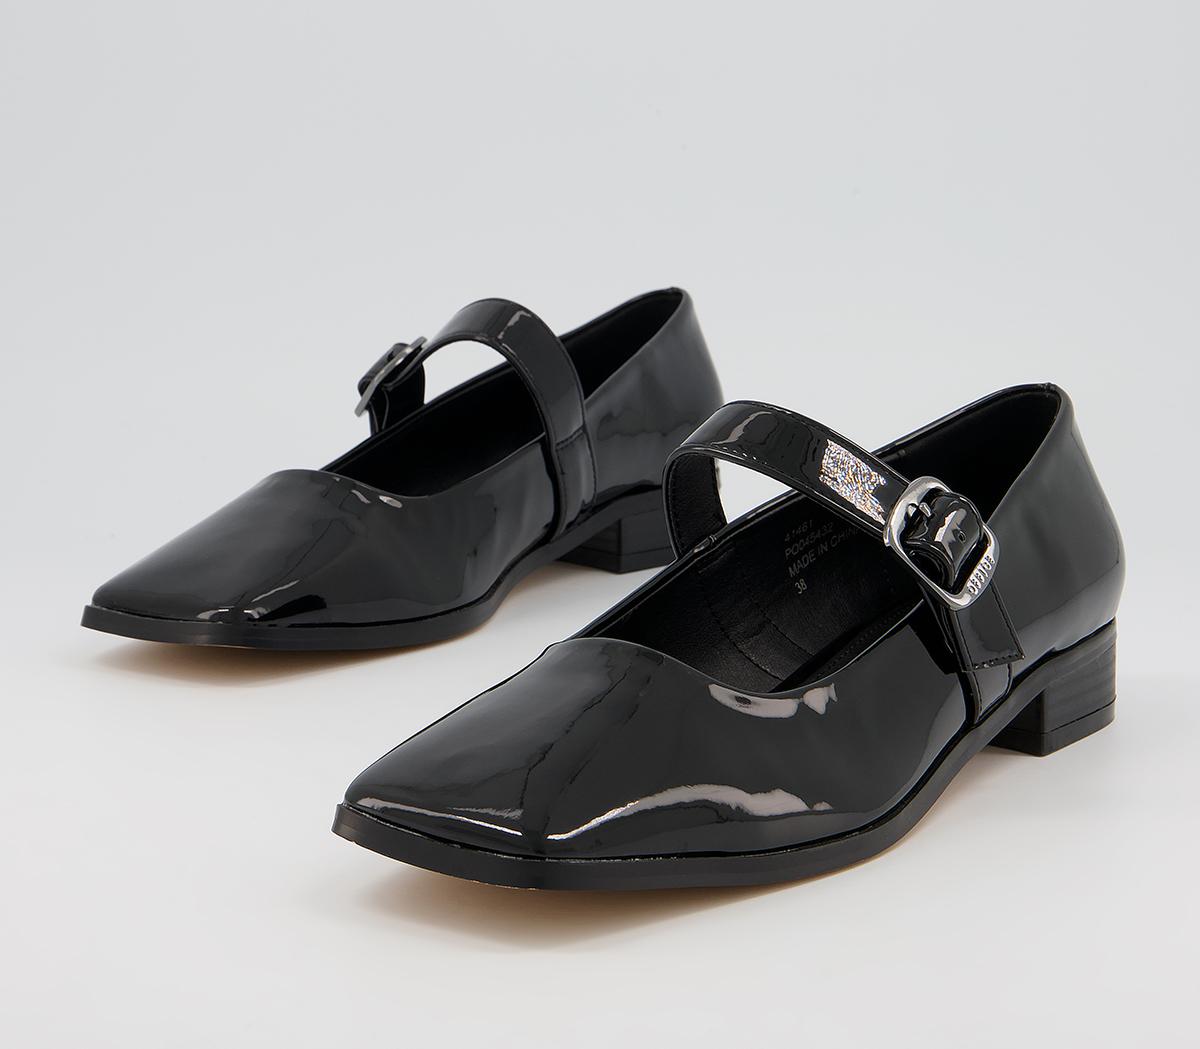 Office Finchley Mary Jane Flats Black Patent - Flat Shoes for Women